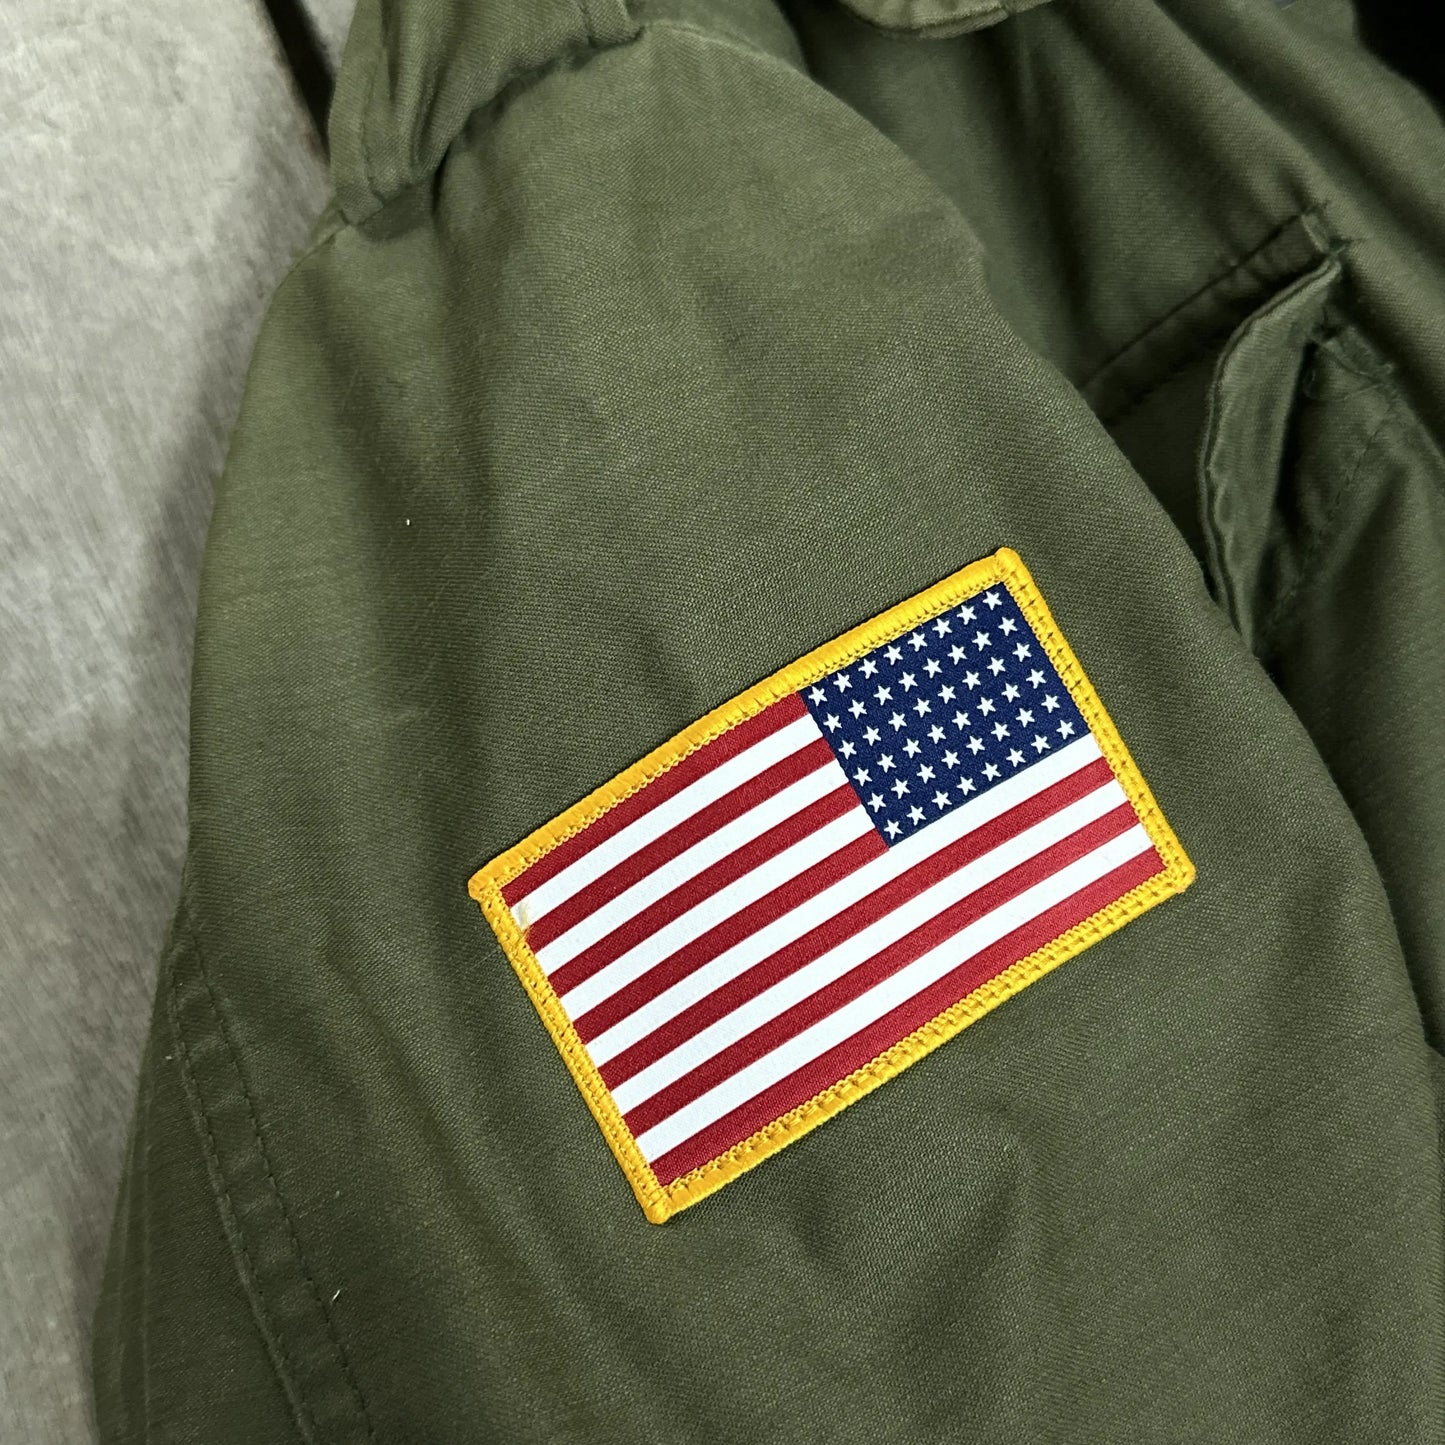 Army field coats with original D-Day design and a 48-star flag